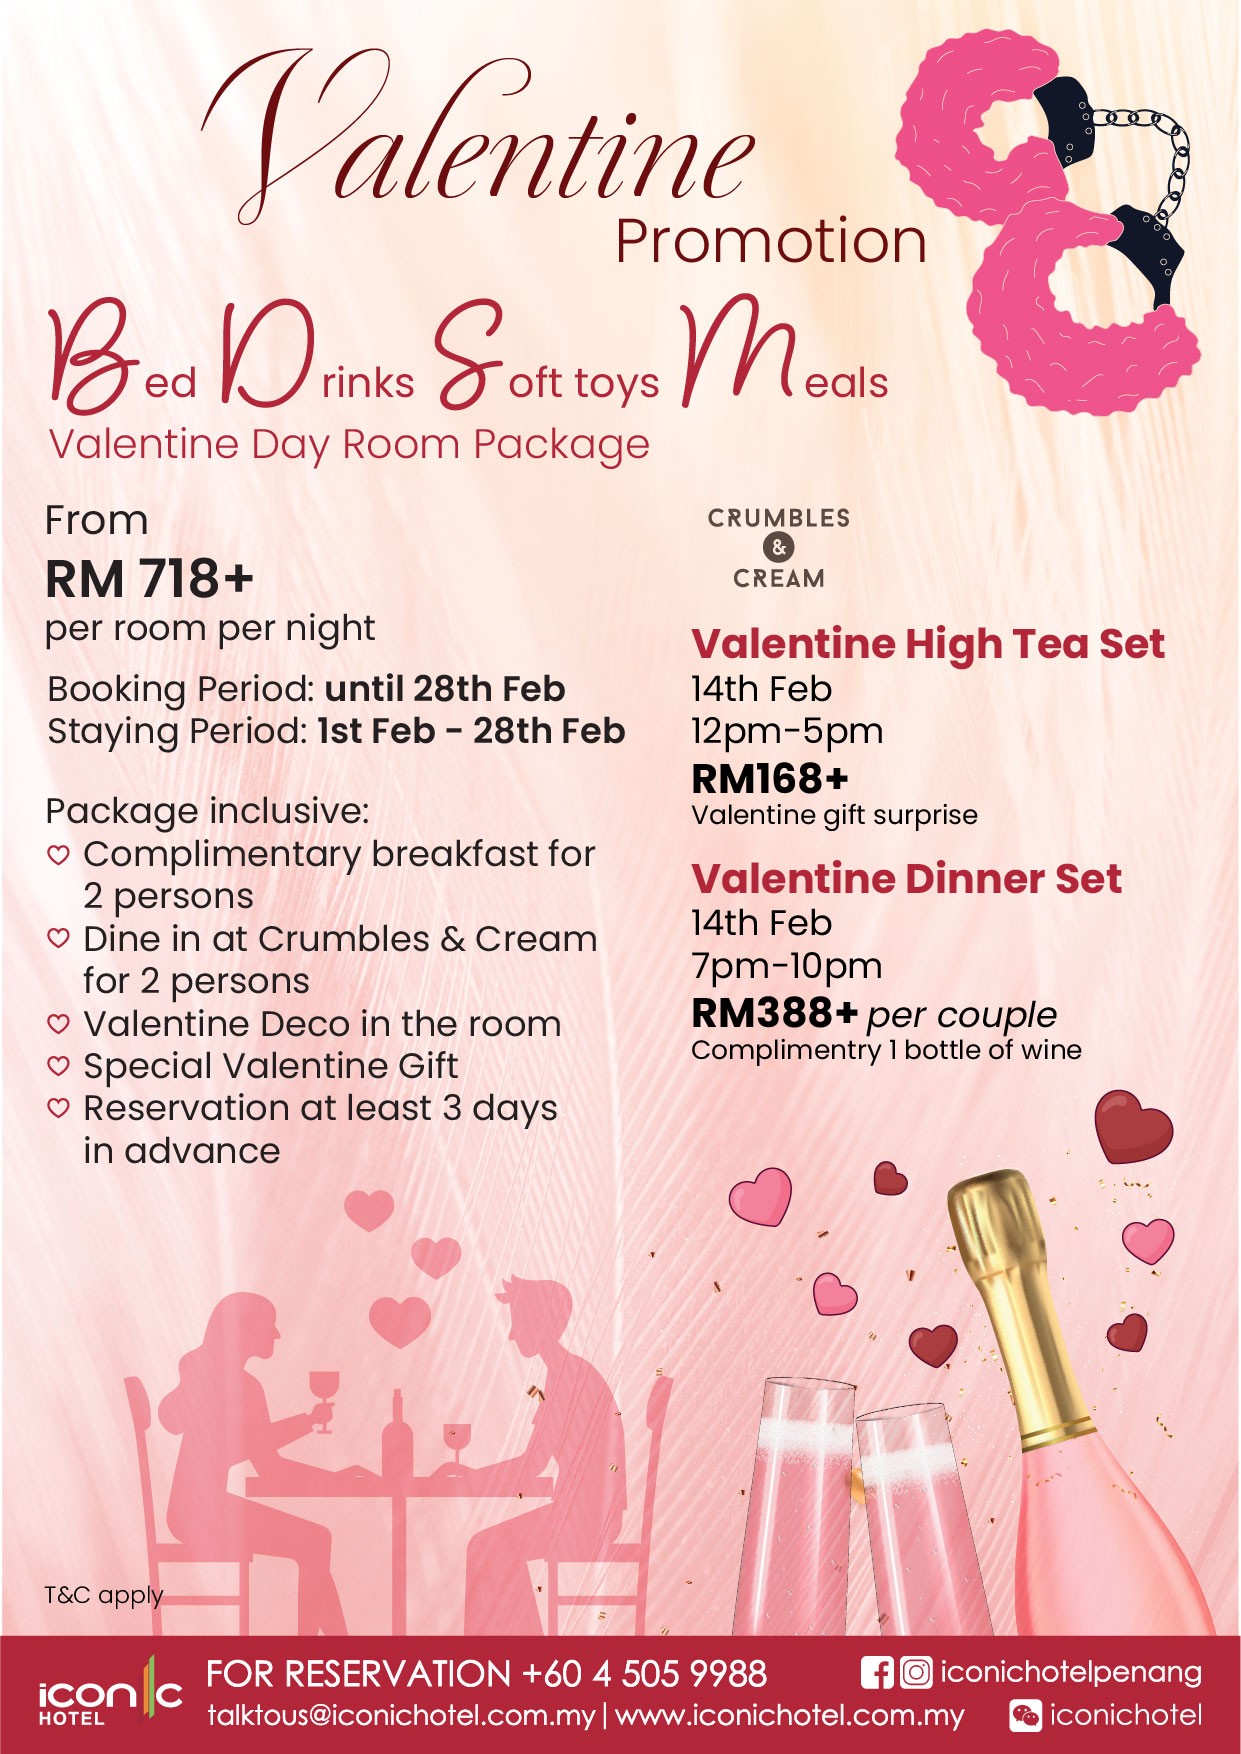 Valentine Promotion by Iconic Hotel